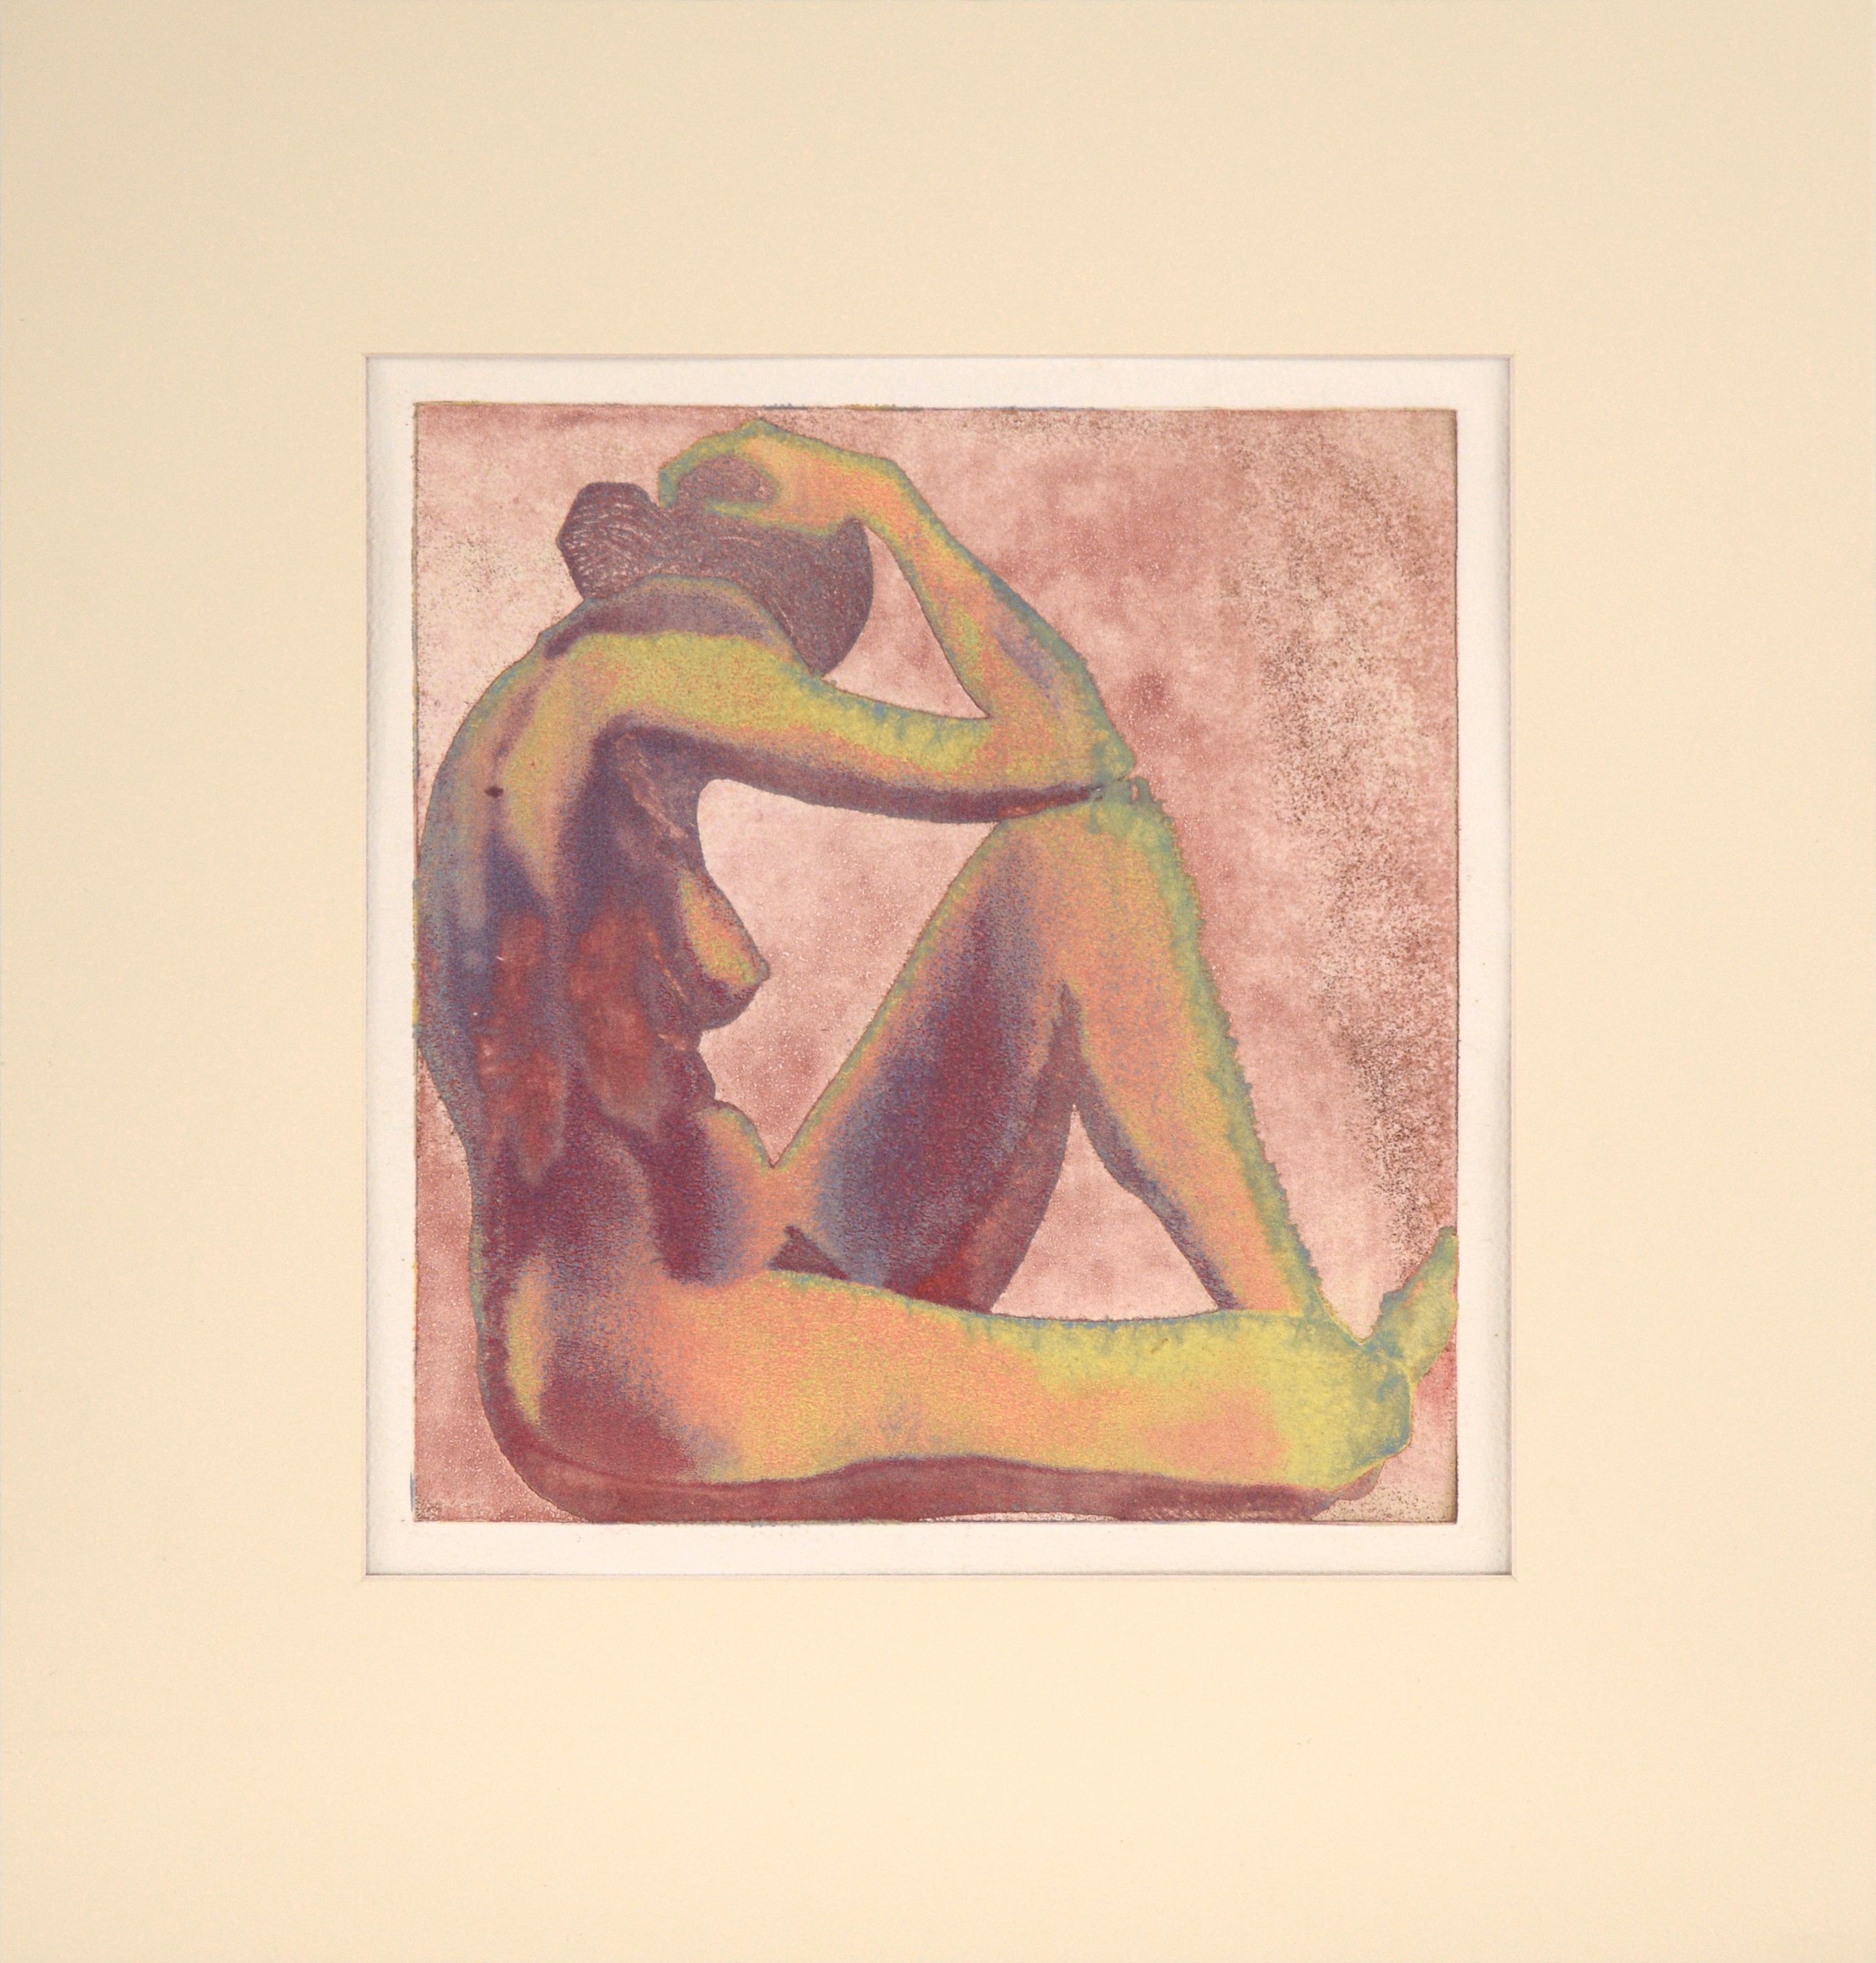 Patricia A Pearce Nude Print - Vintage Figurative Nude - Steel Plate Etching